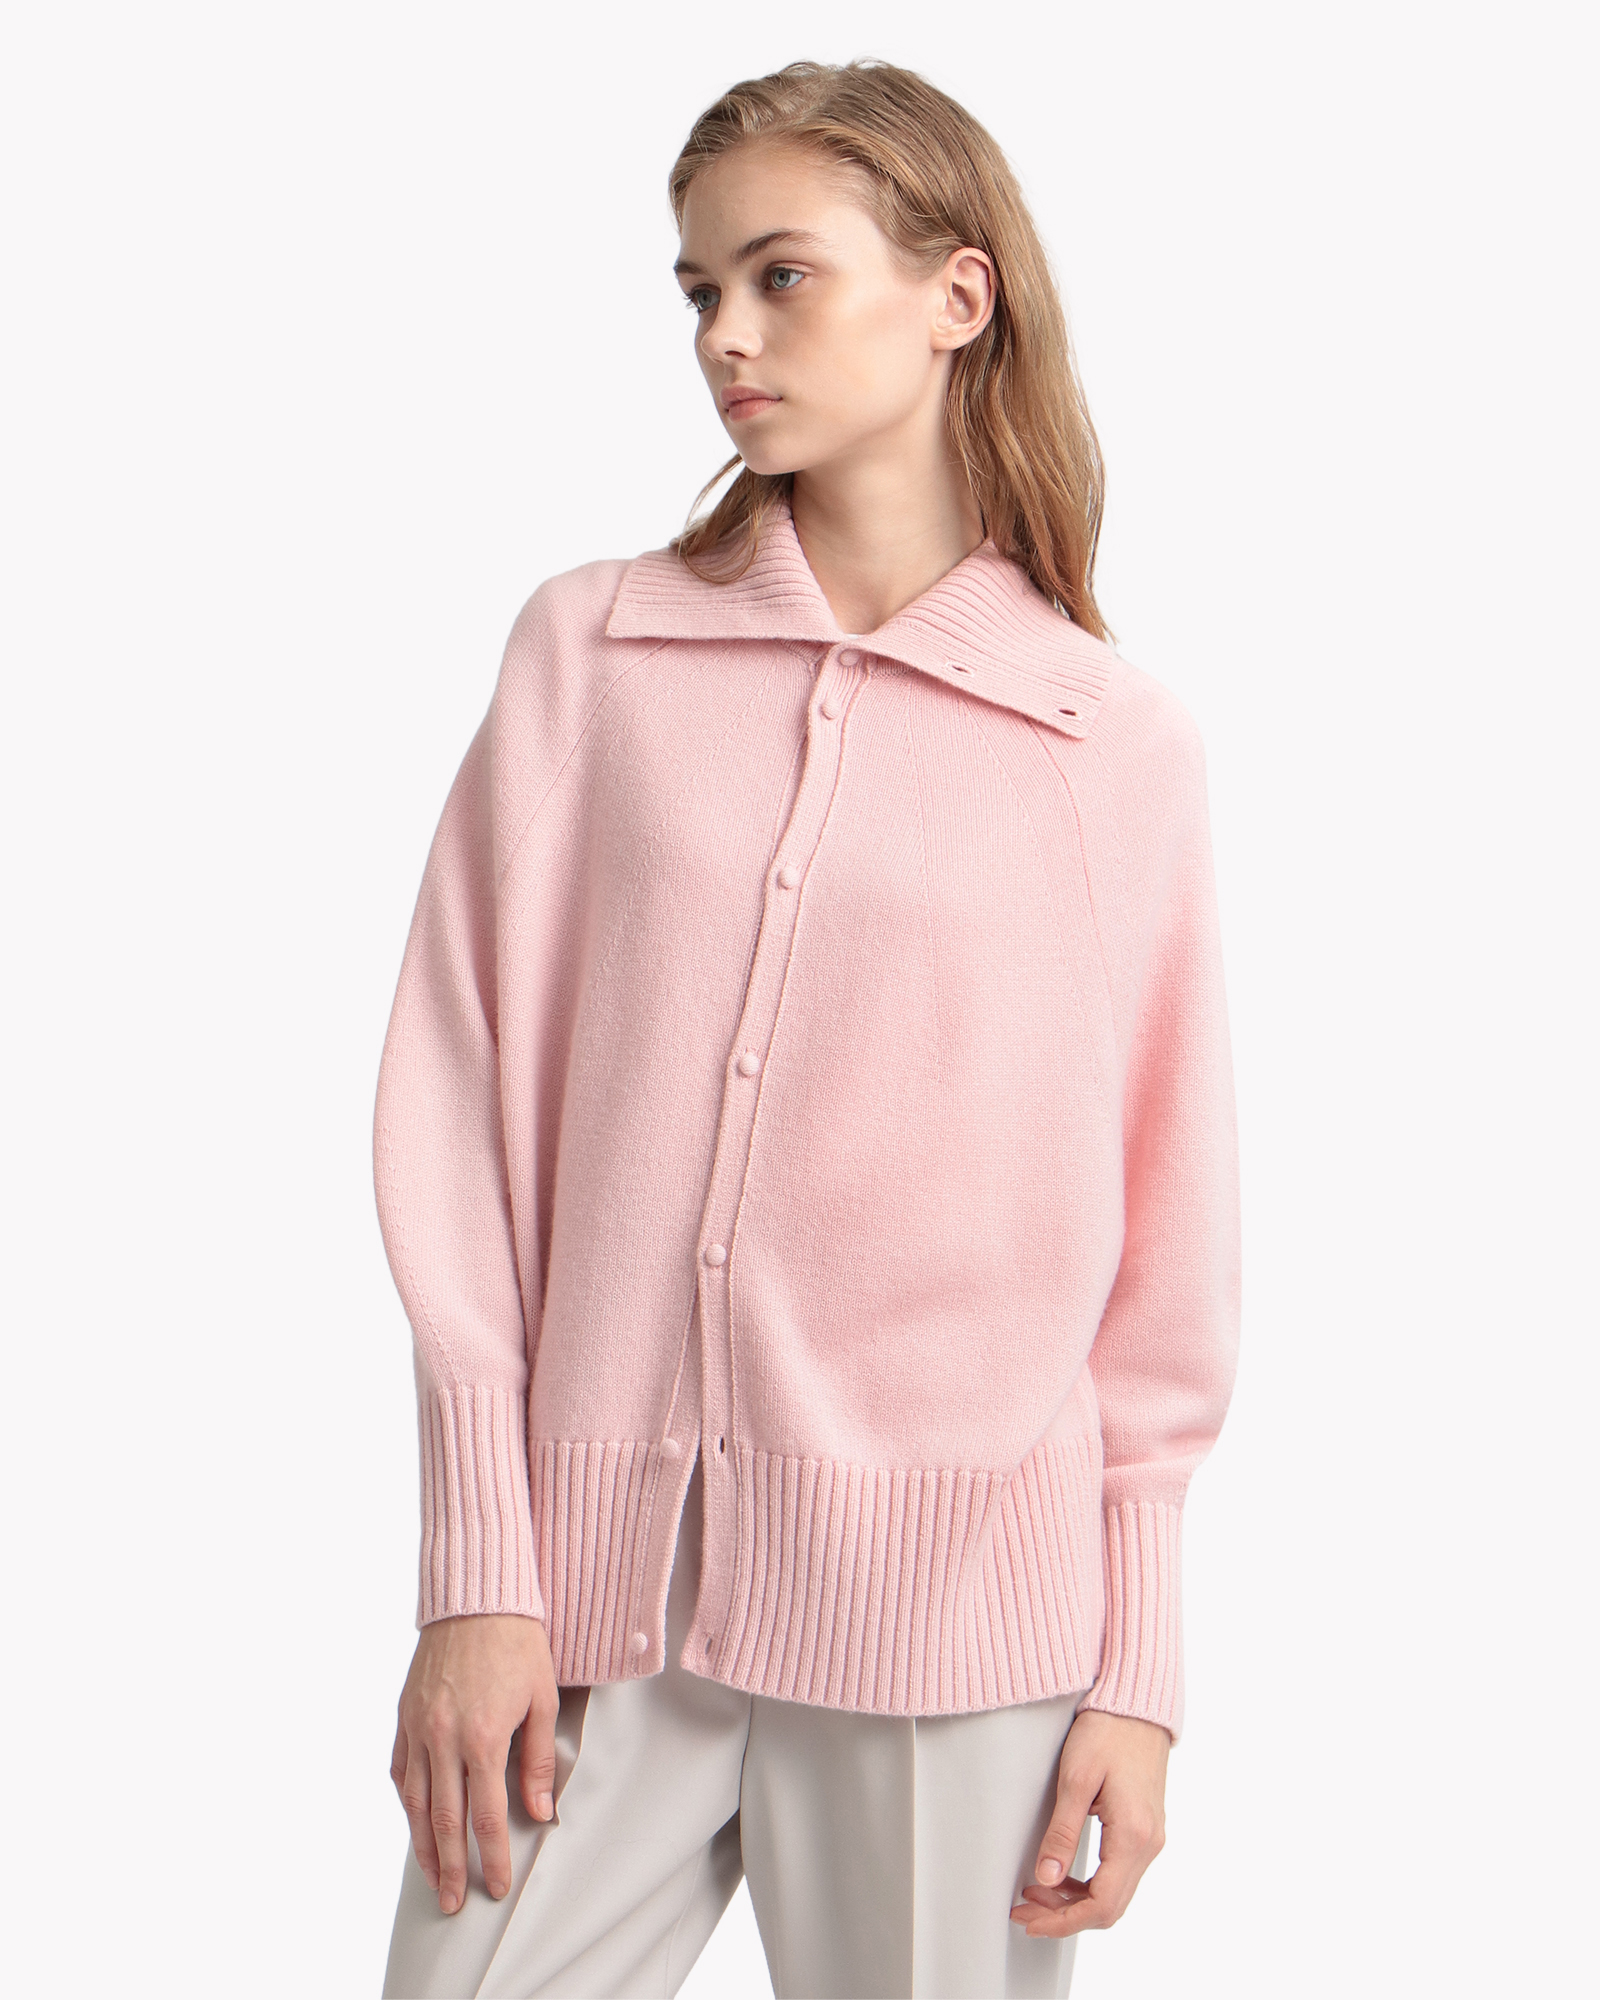 Cashmere Zora | Theory luxe[セオリーリュクス]公式通販サイト